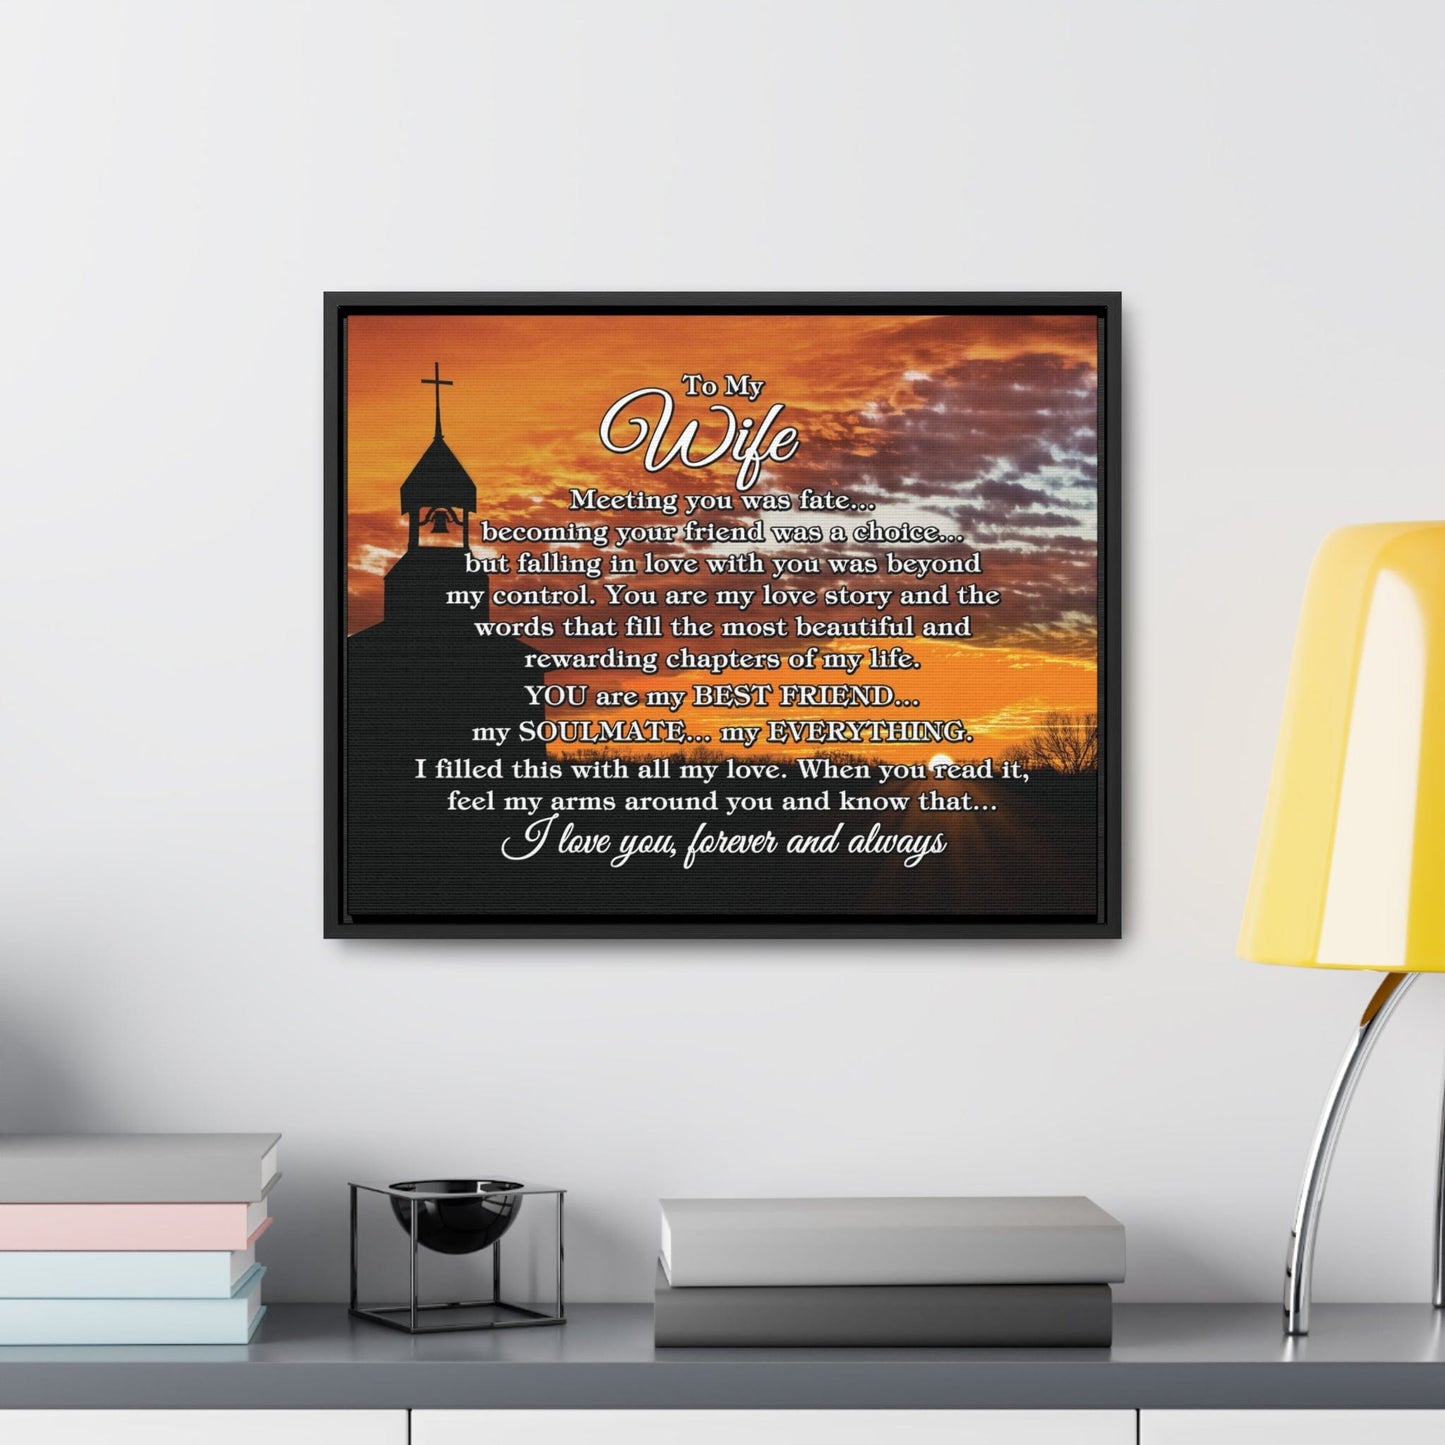 To My Wife "Meeting you was..." Framed Canvas (Country Church Sunset)